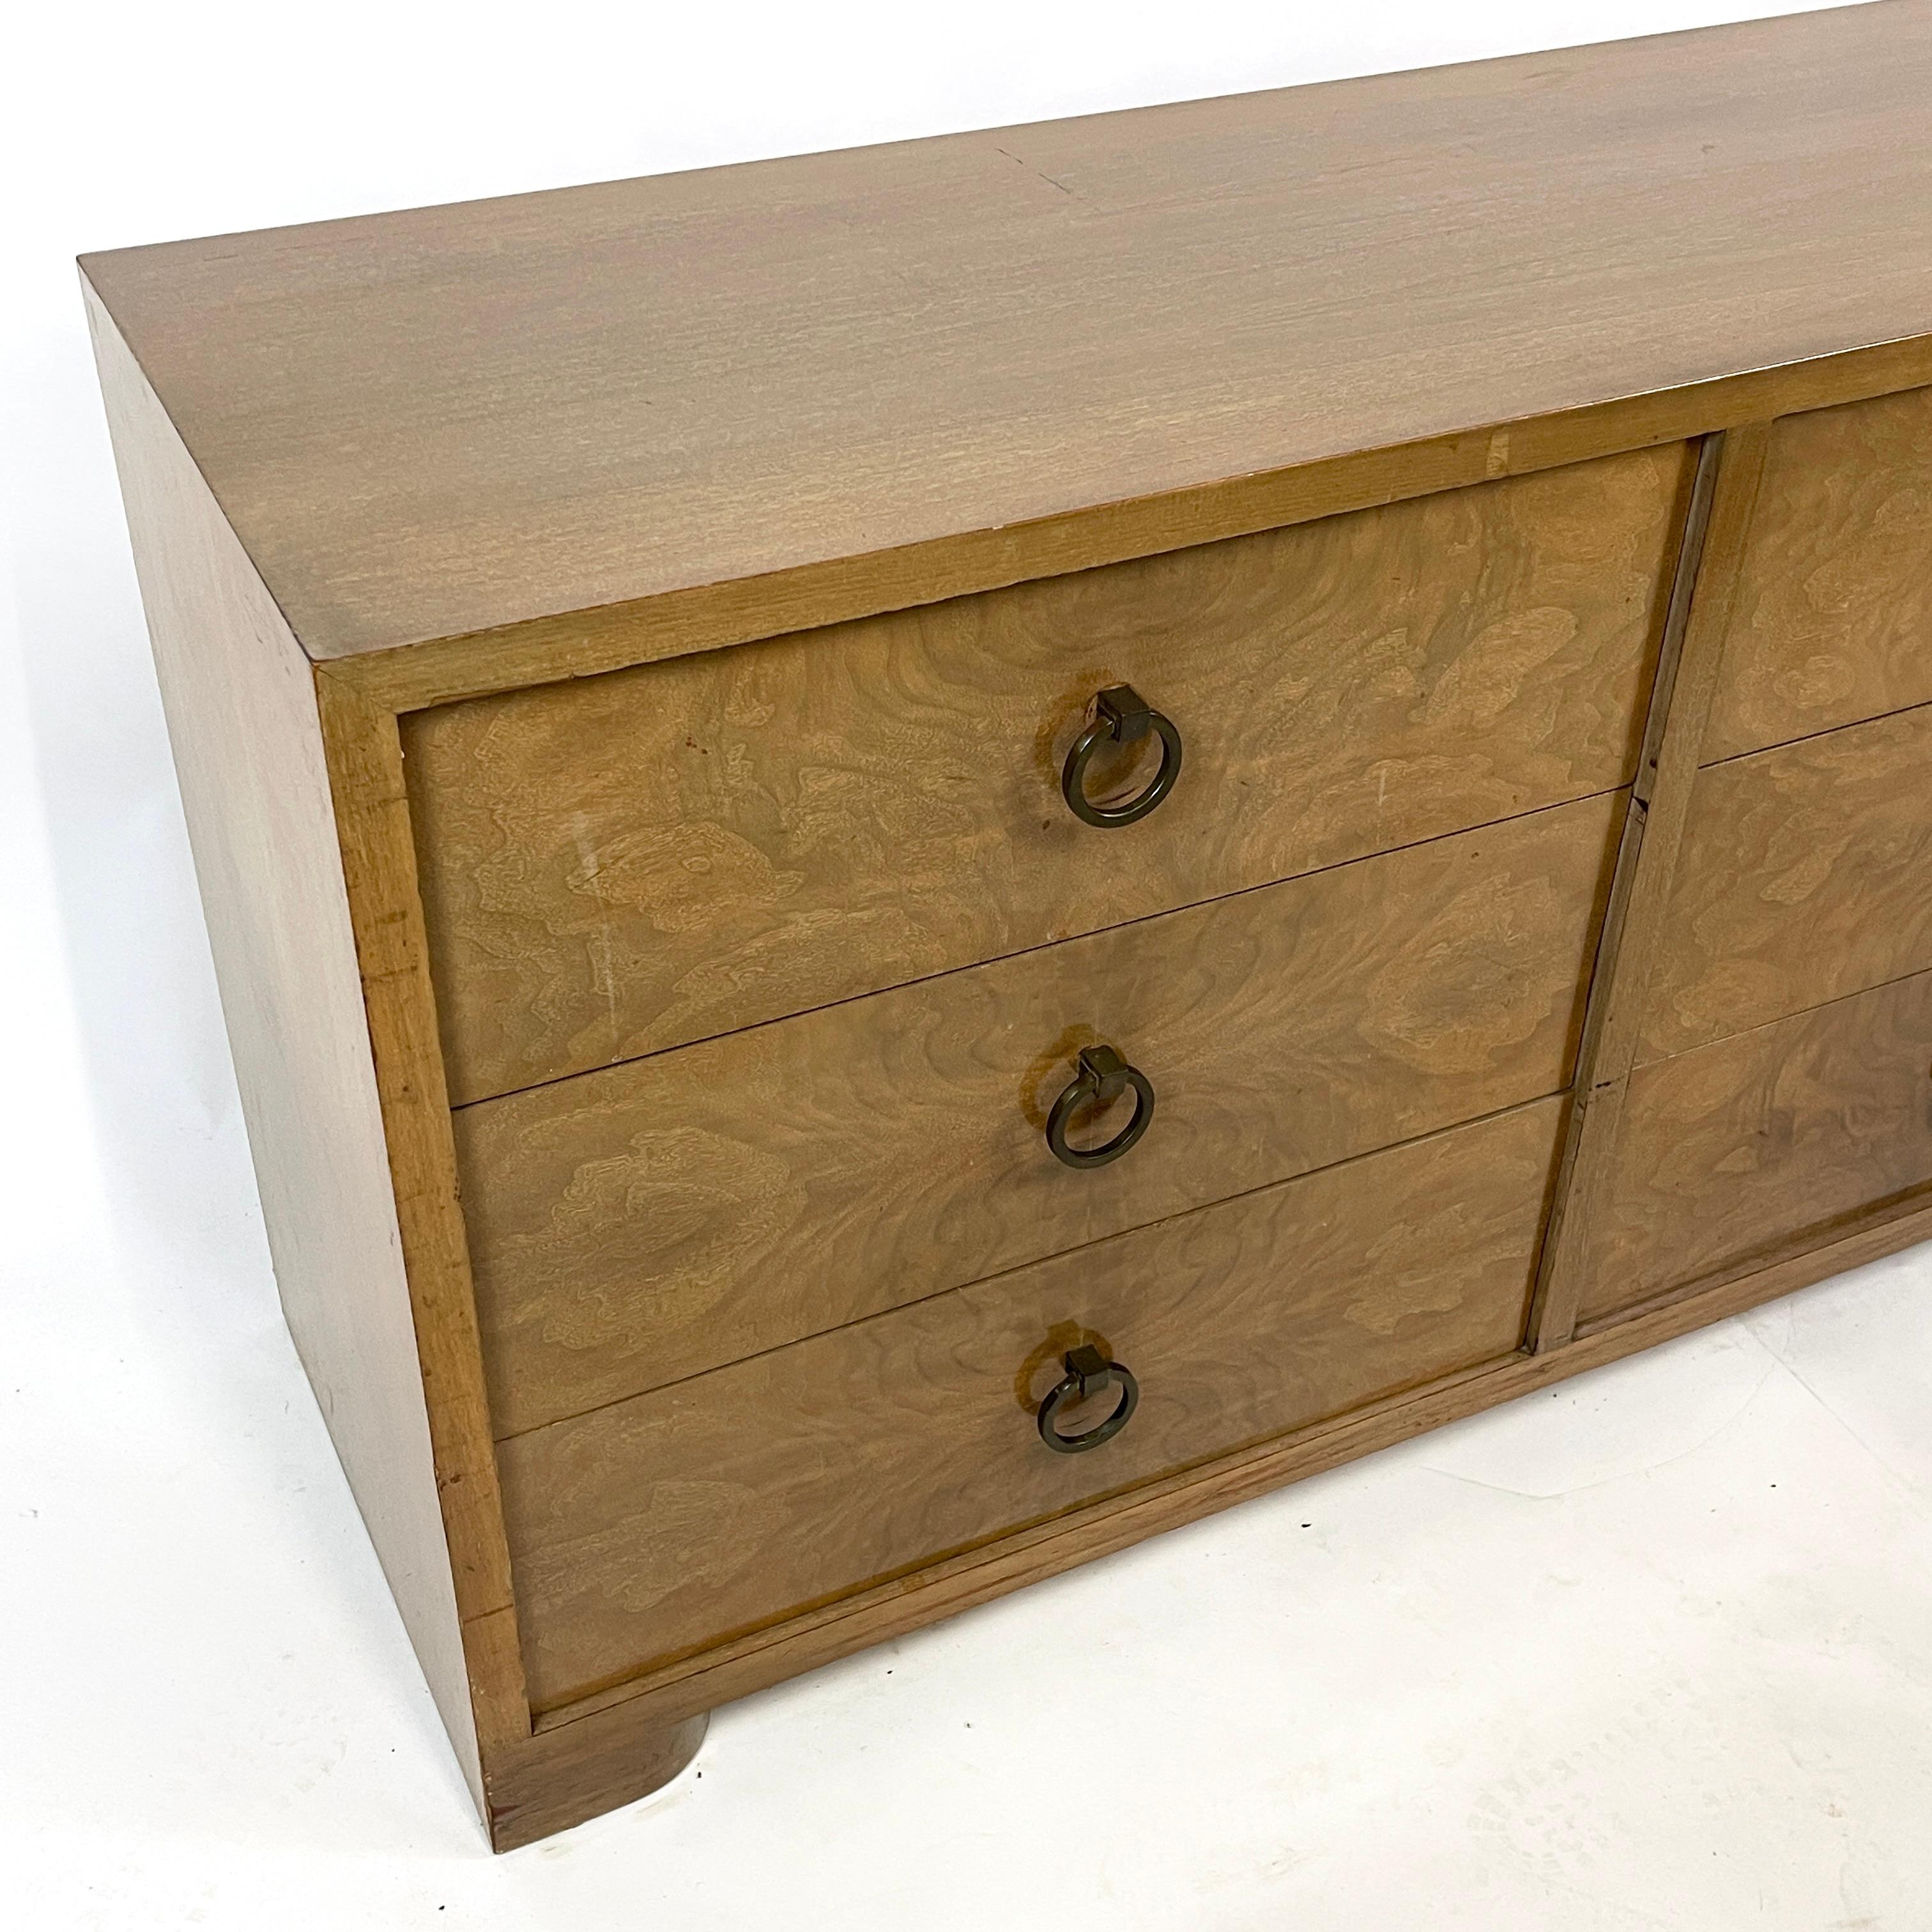 All original 1950s dresser by Red Lion Firniture. Stunning burled mahogany drawer fronts with elegant brass ring pulls. Solid wood with mahogany case. Sculpted feet complete the look of this American Art Deco piece. Glorious rich tones and action